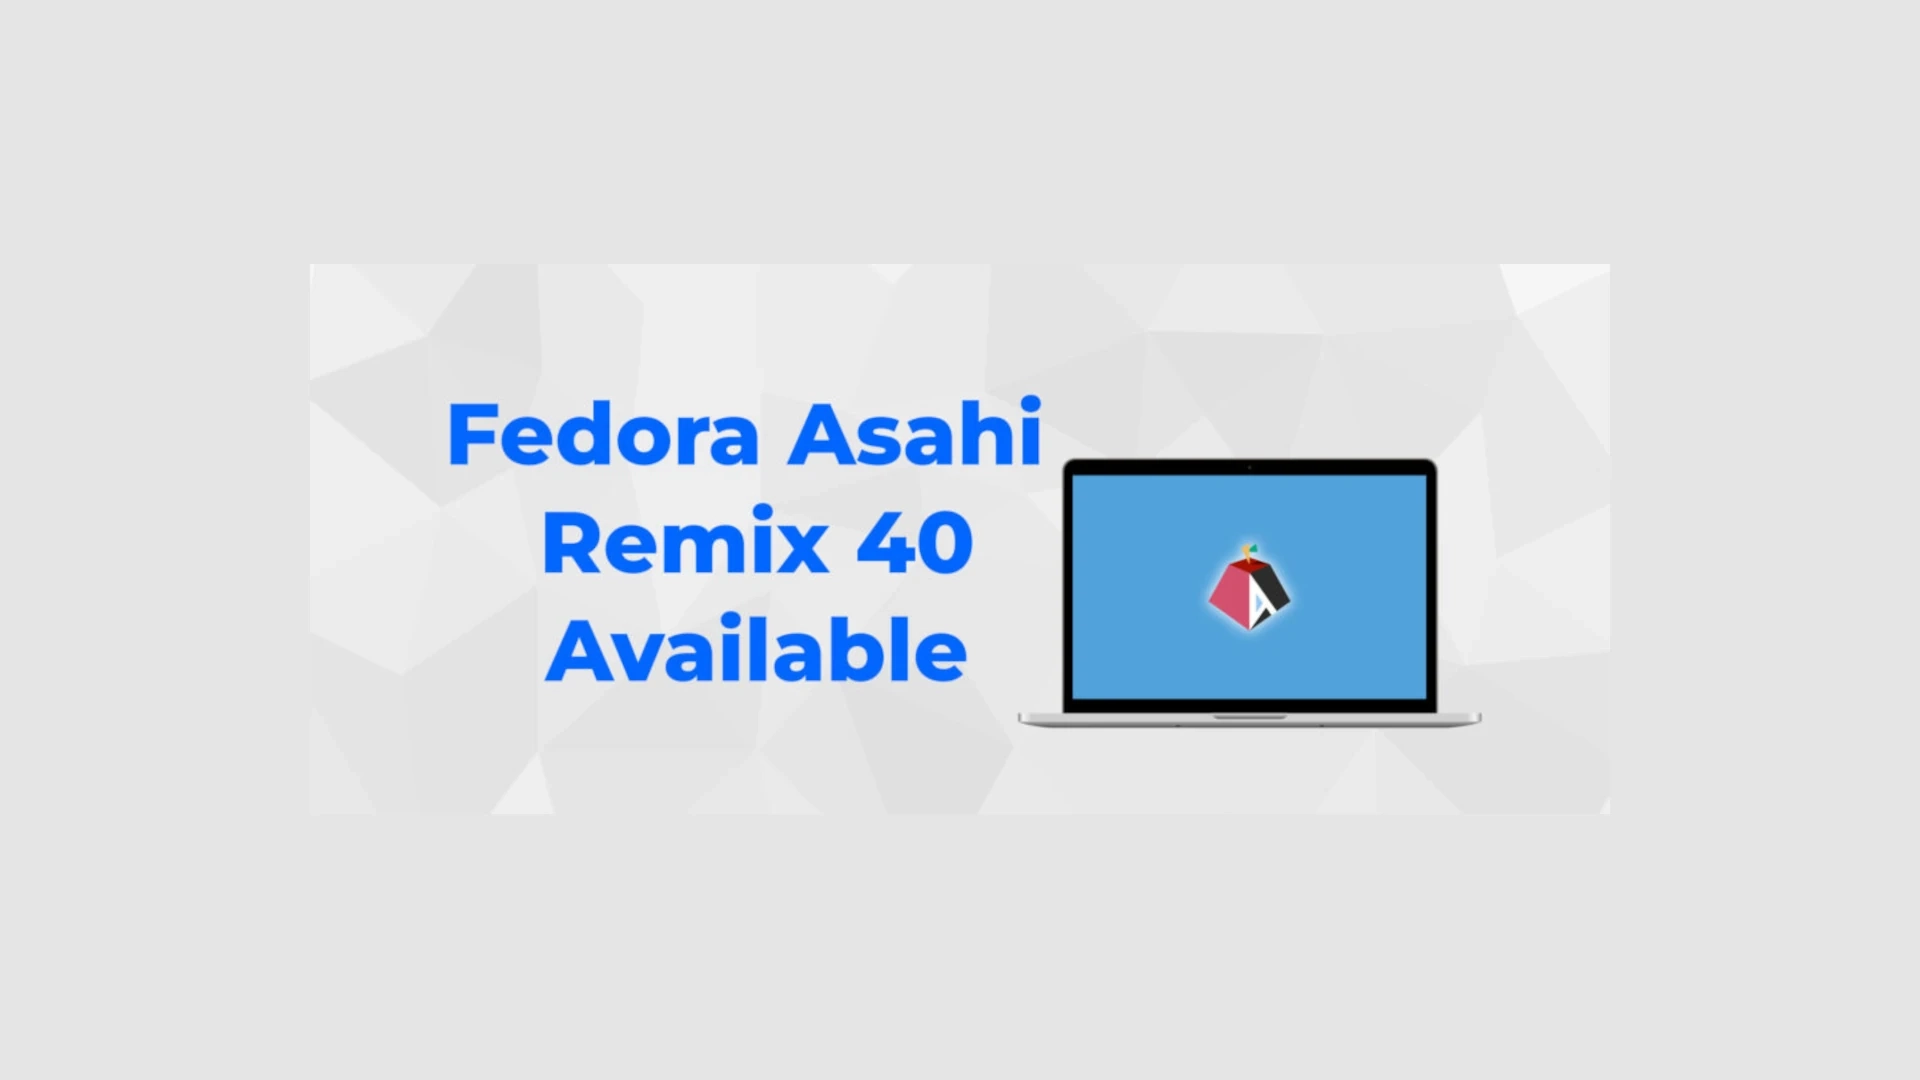 New Release: Fedora Asahi Remix 40 Now Supporting Apple Silicon Macs with KDE Plasma 6